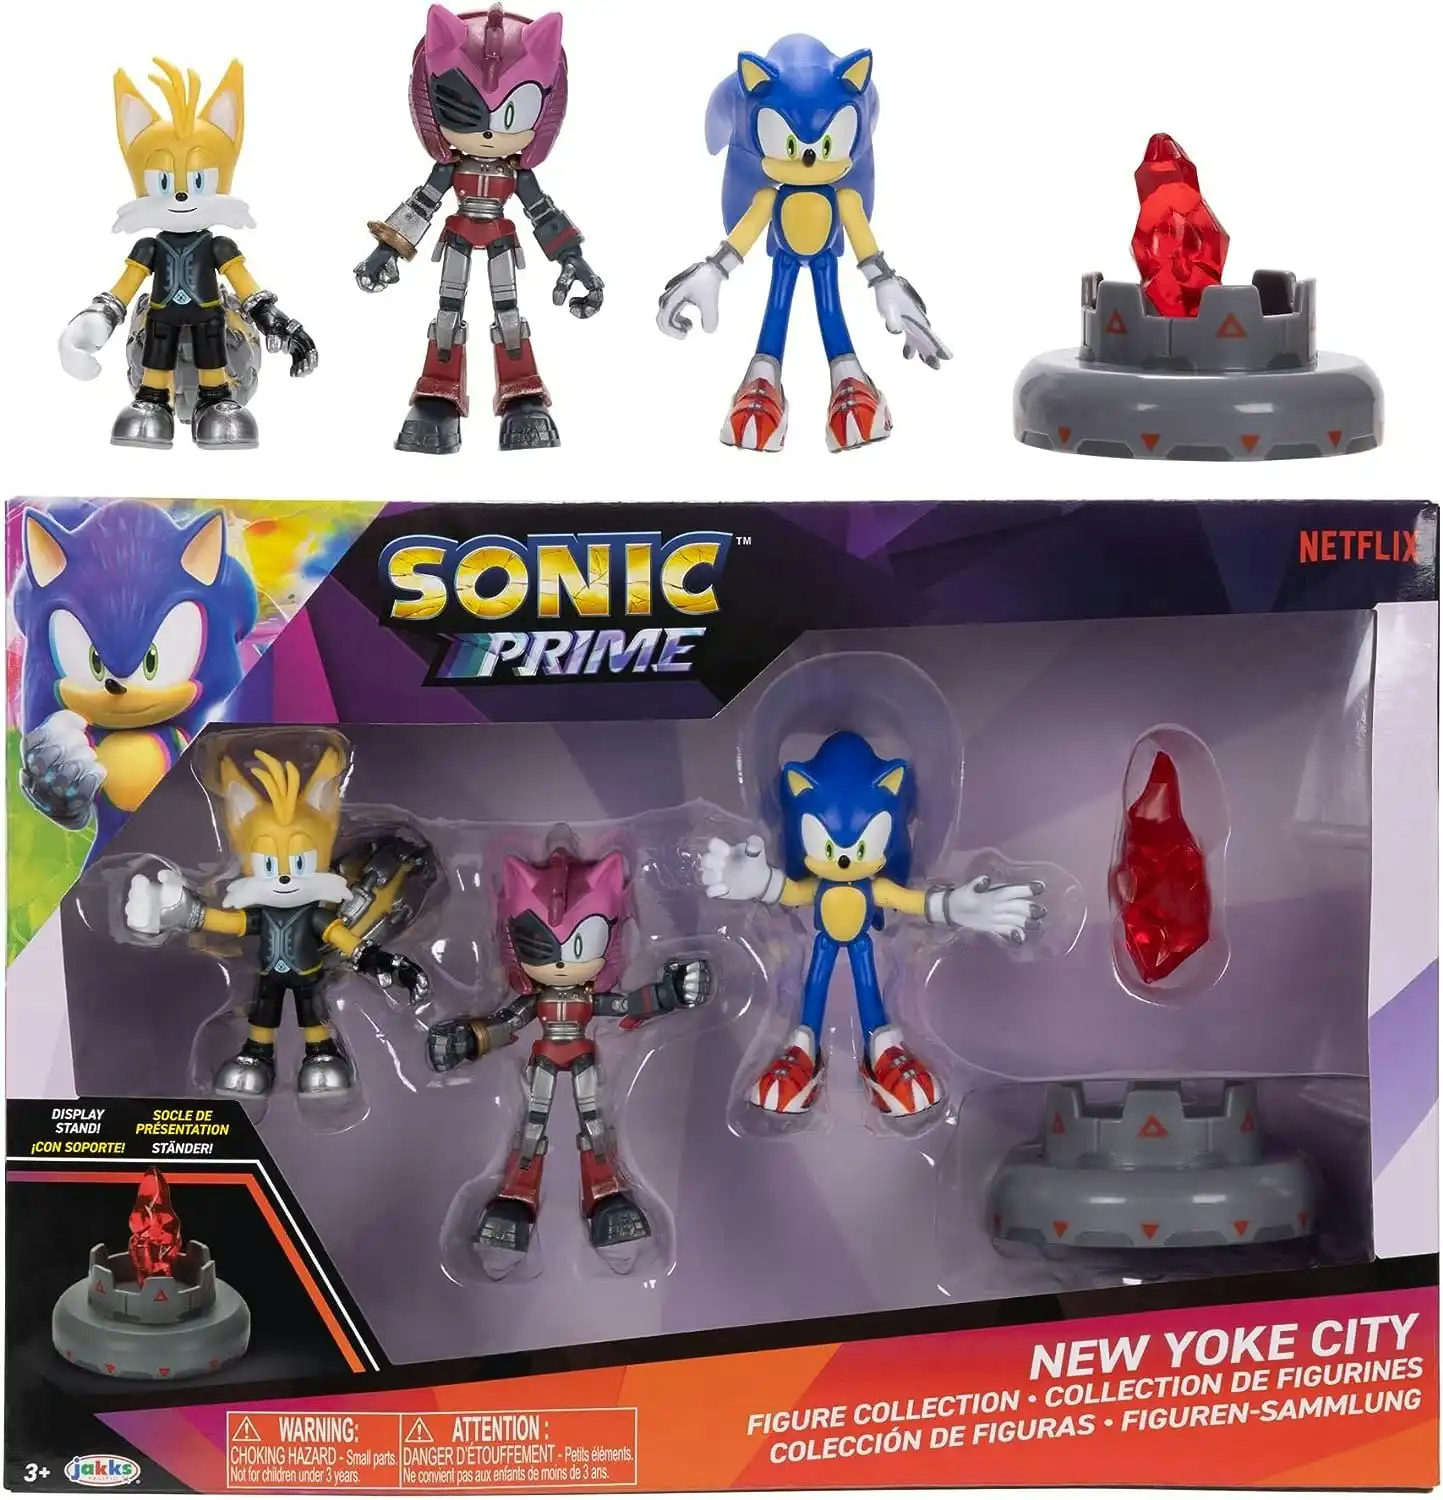 Sonic Prime 2.5" Figure Multipack with Sonic